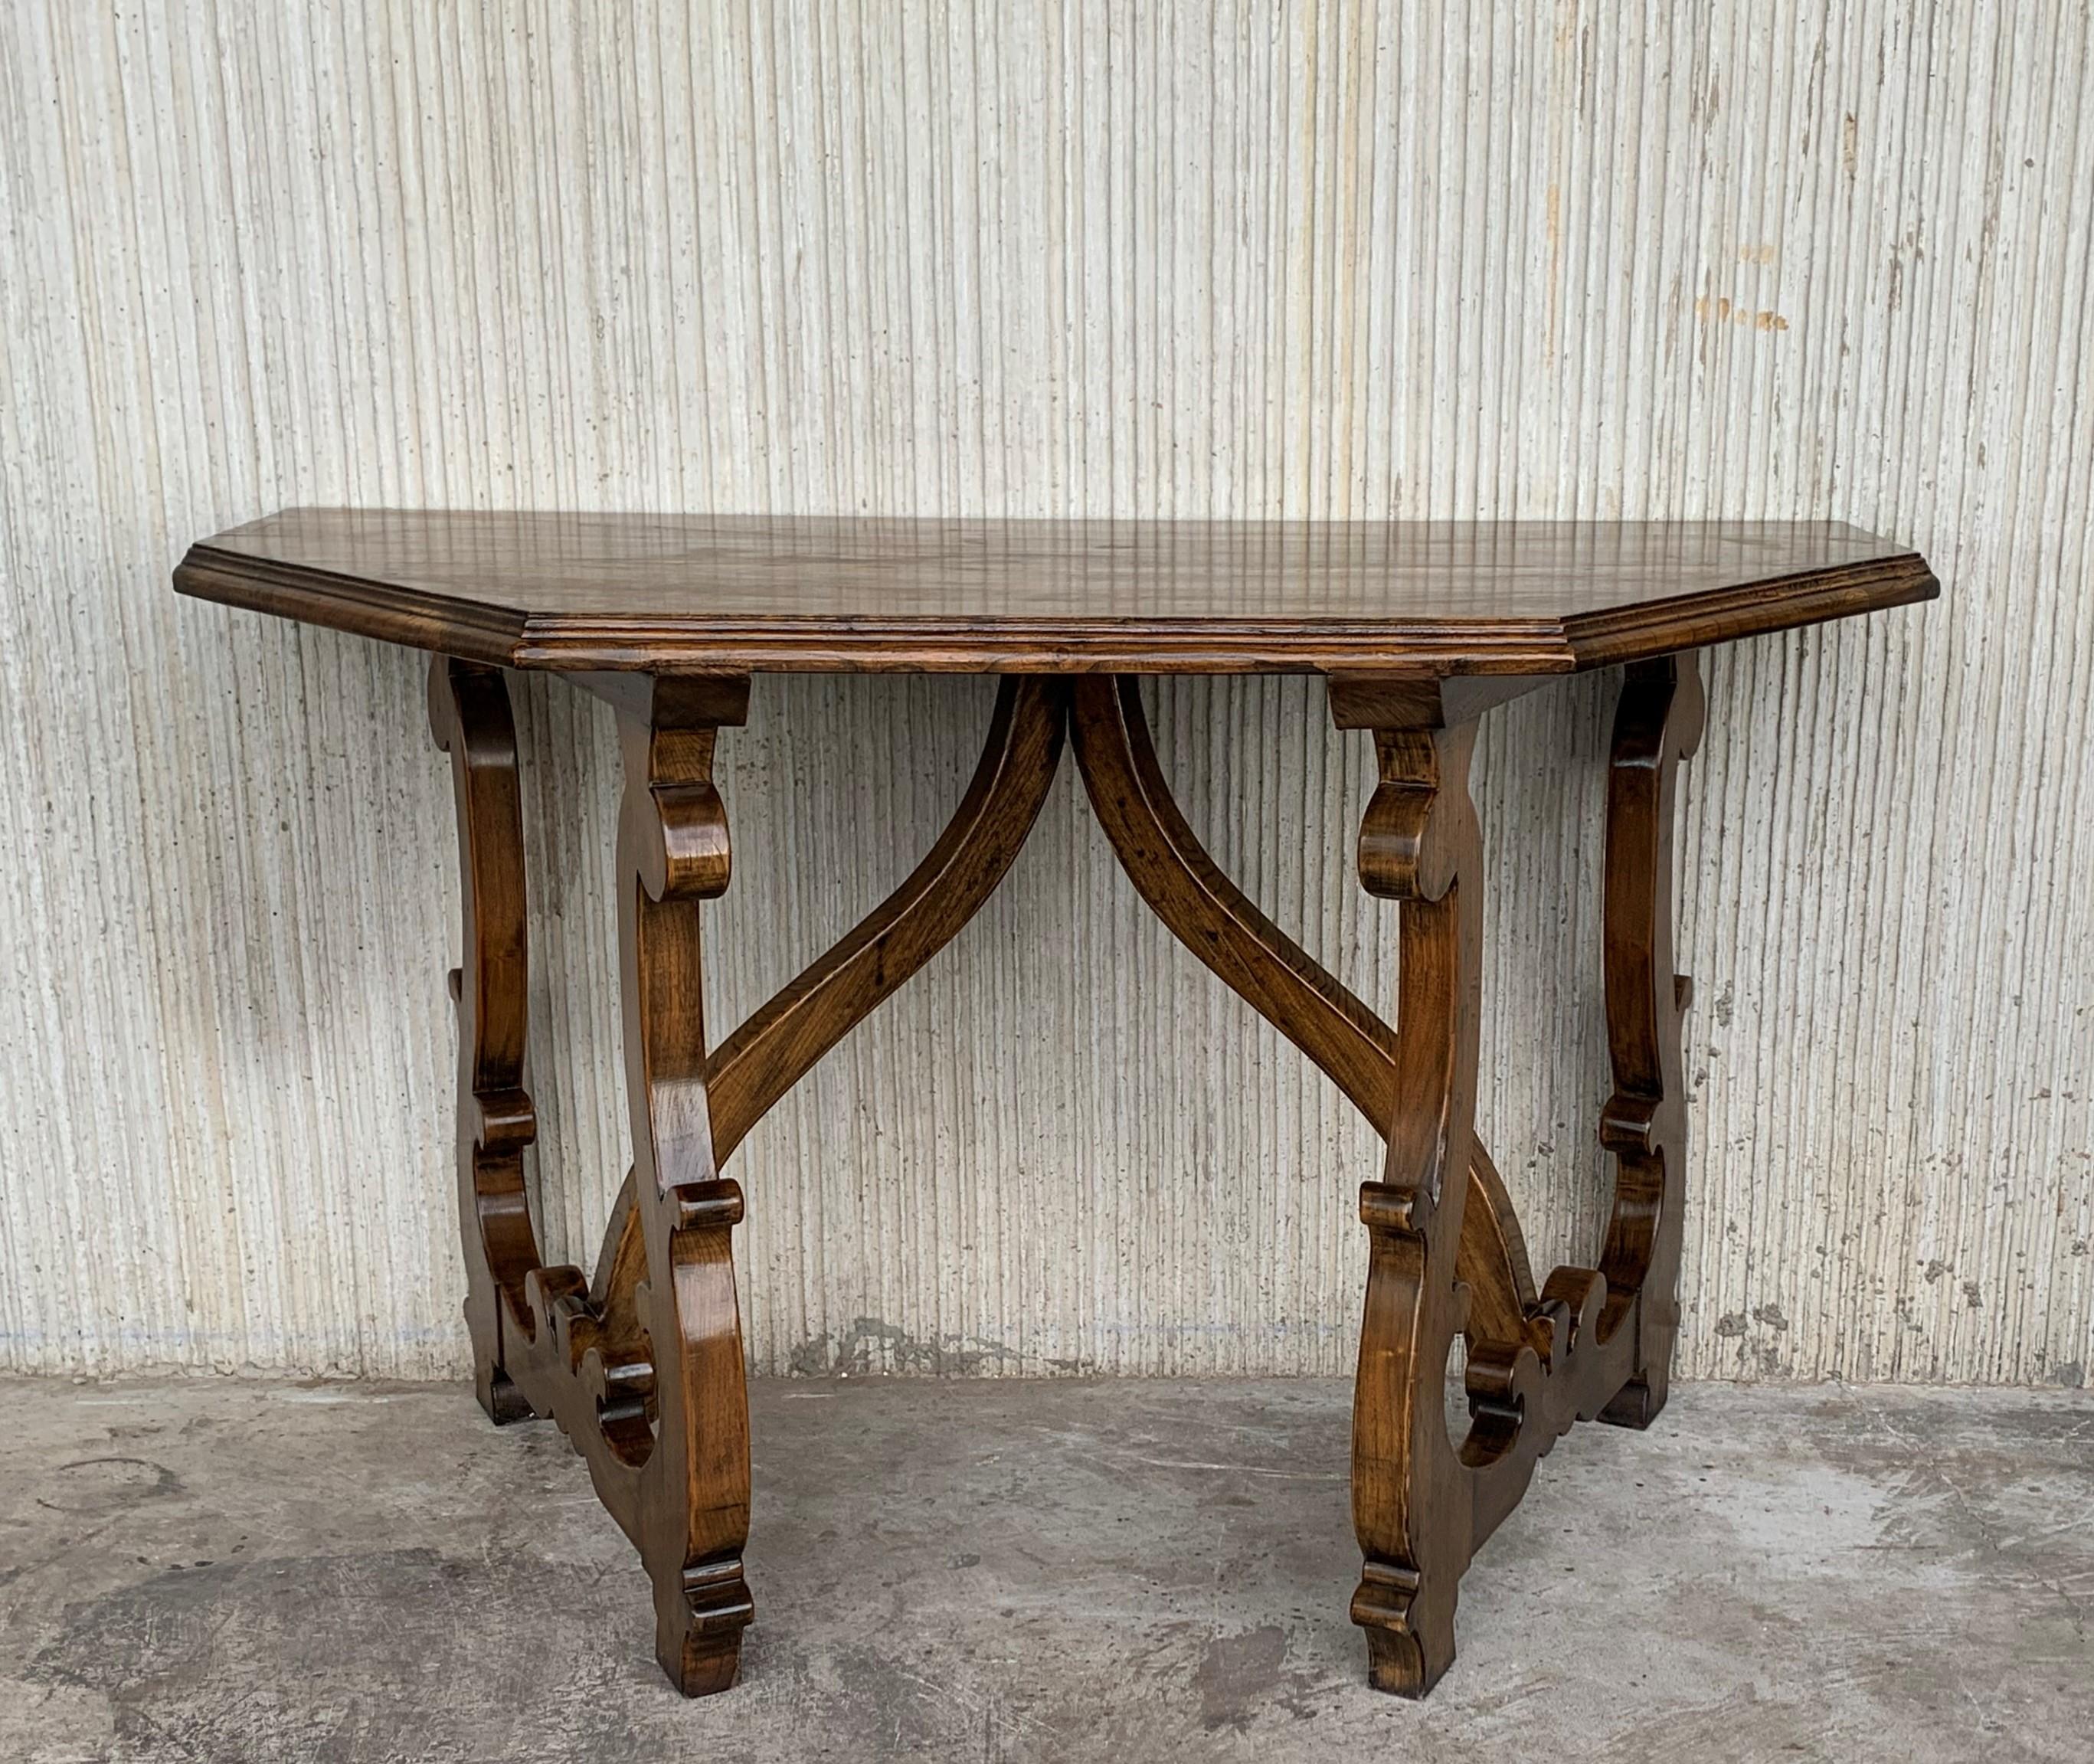 20th Century Early 20th Convertible Spanish Walnut Dining Room, Center Table with Lyre Legs